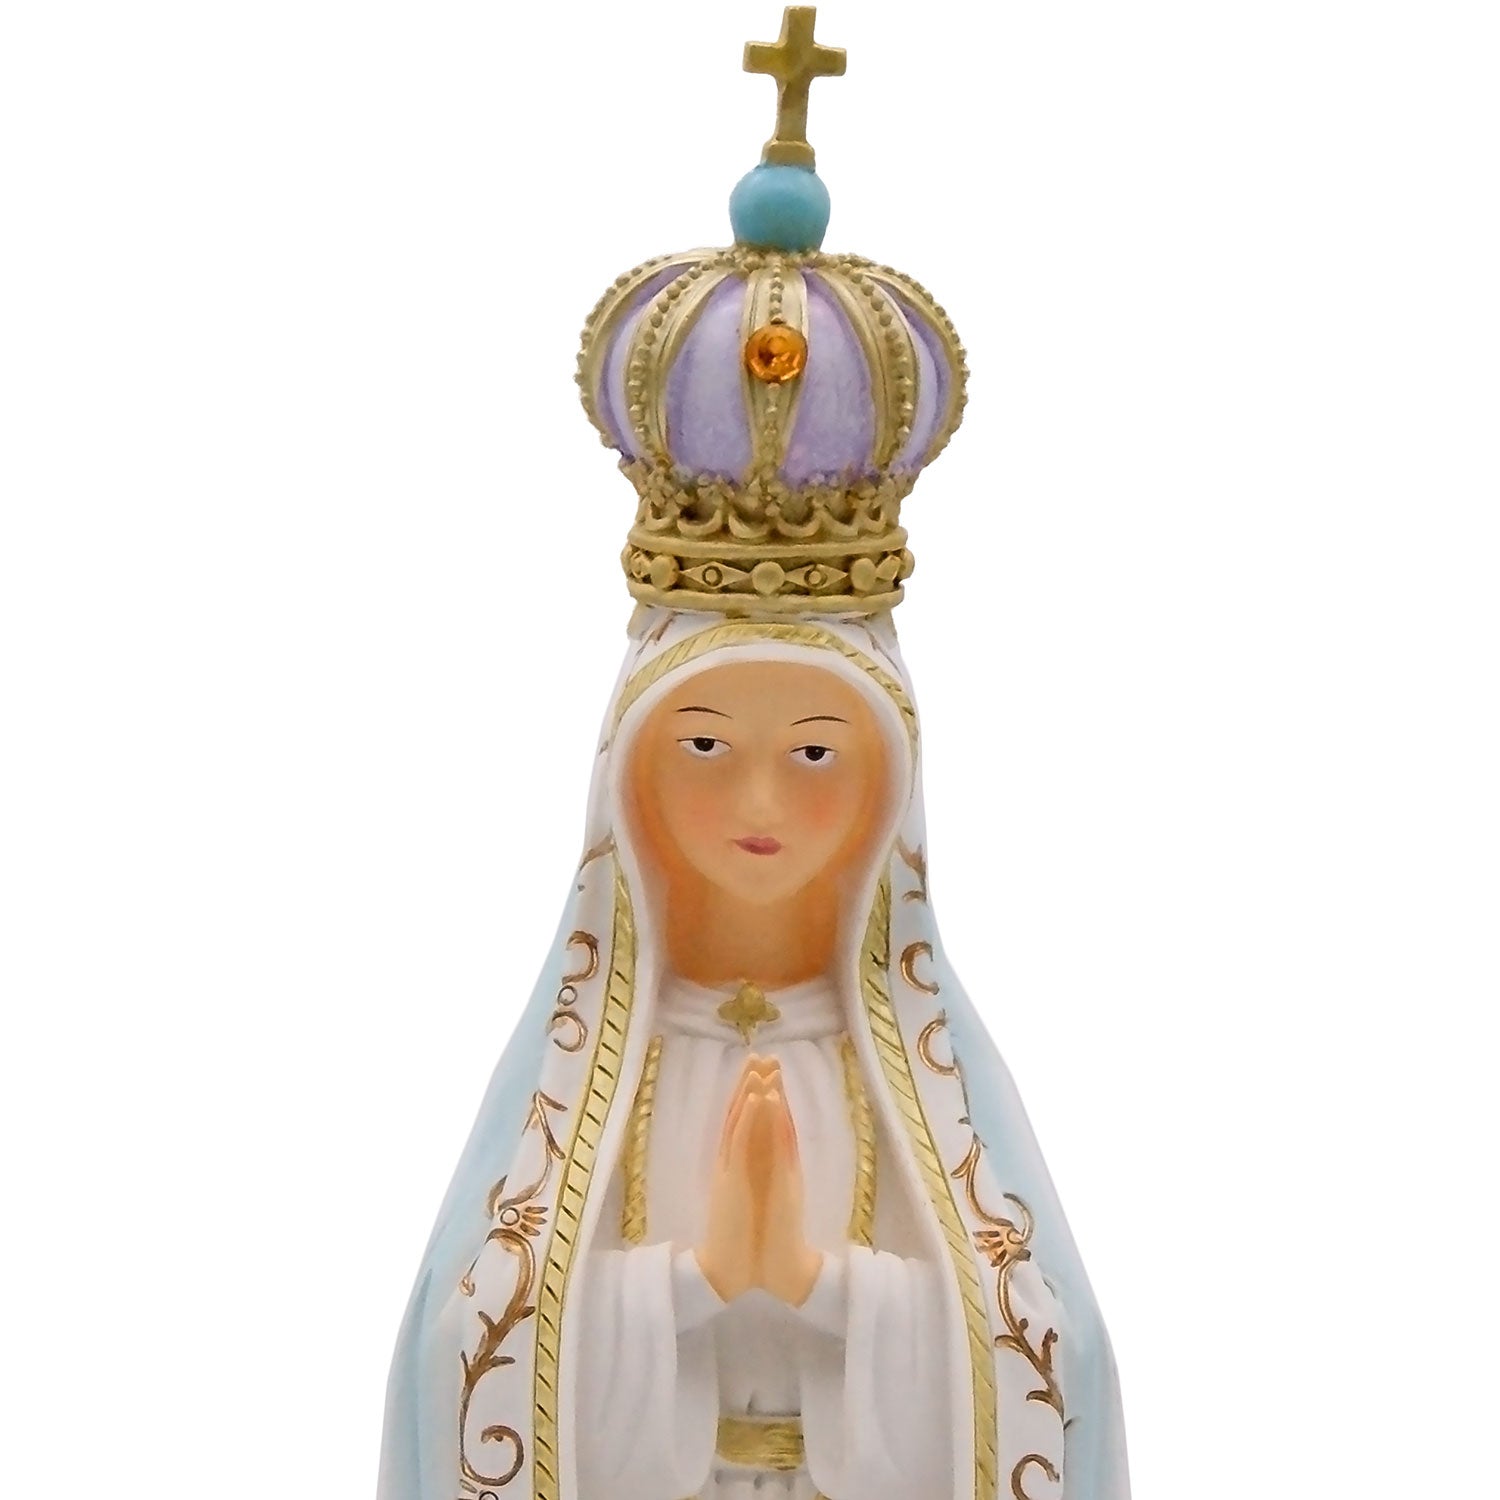 This made in Portugal Virgin Mary statue it's directly inspired by the image presented at the Chapel of Apparitions, showing Our Lady with a white mantle with light blue and golden accents painted by hand. 